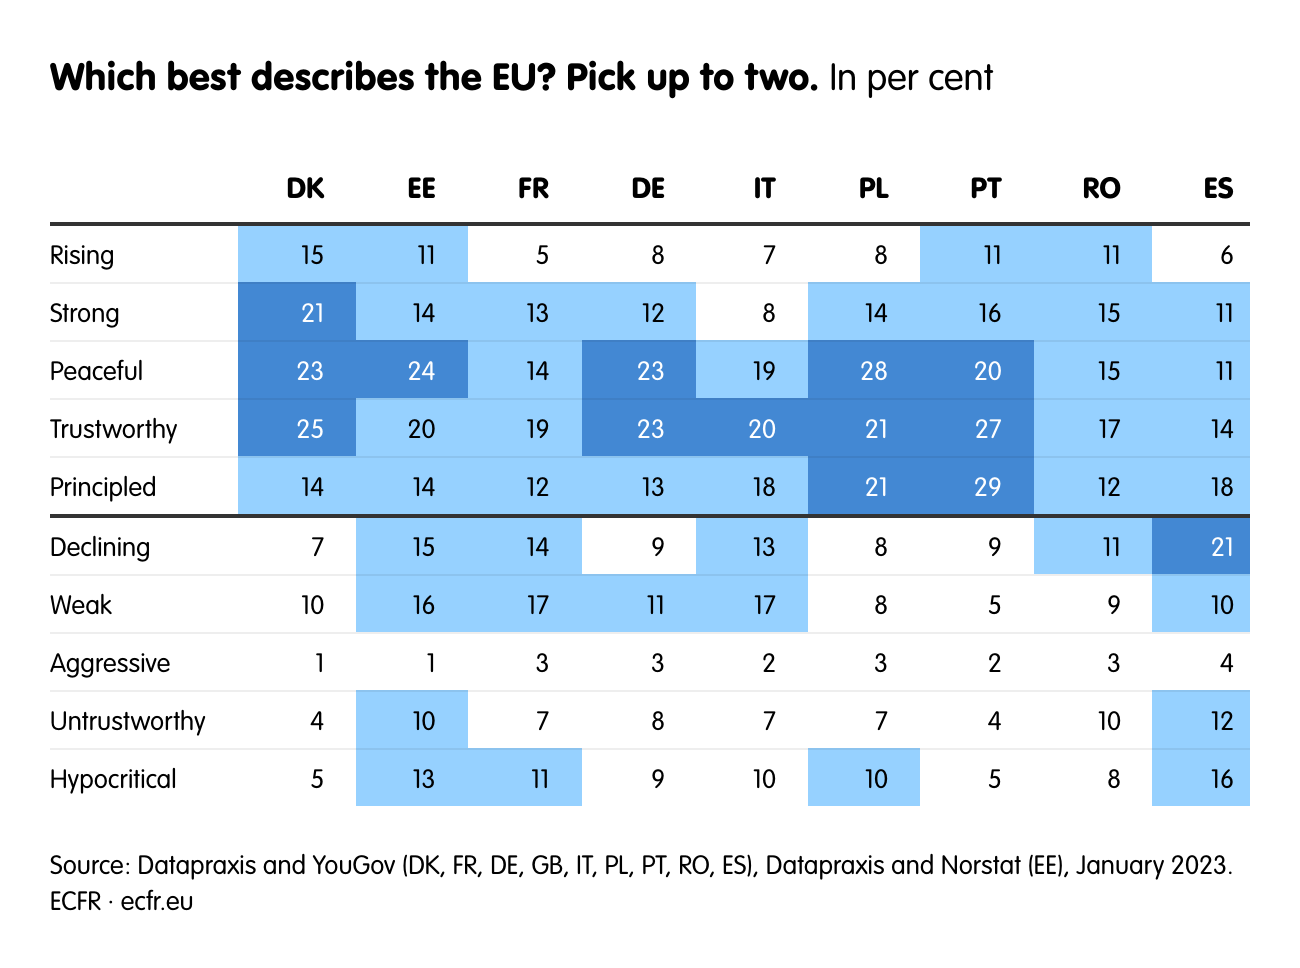 Which best describes the EU? Pick up to two.